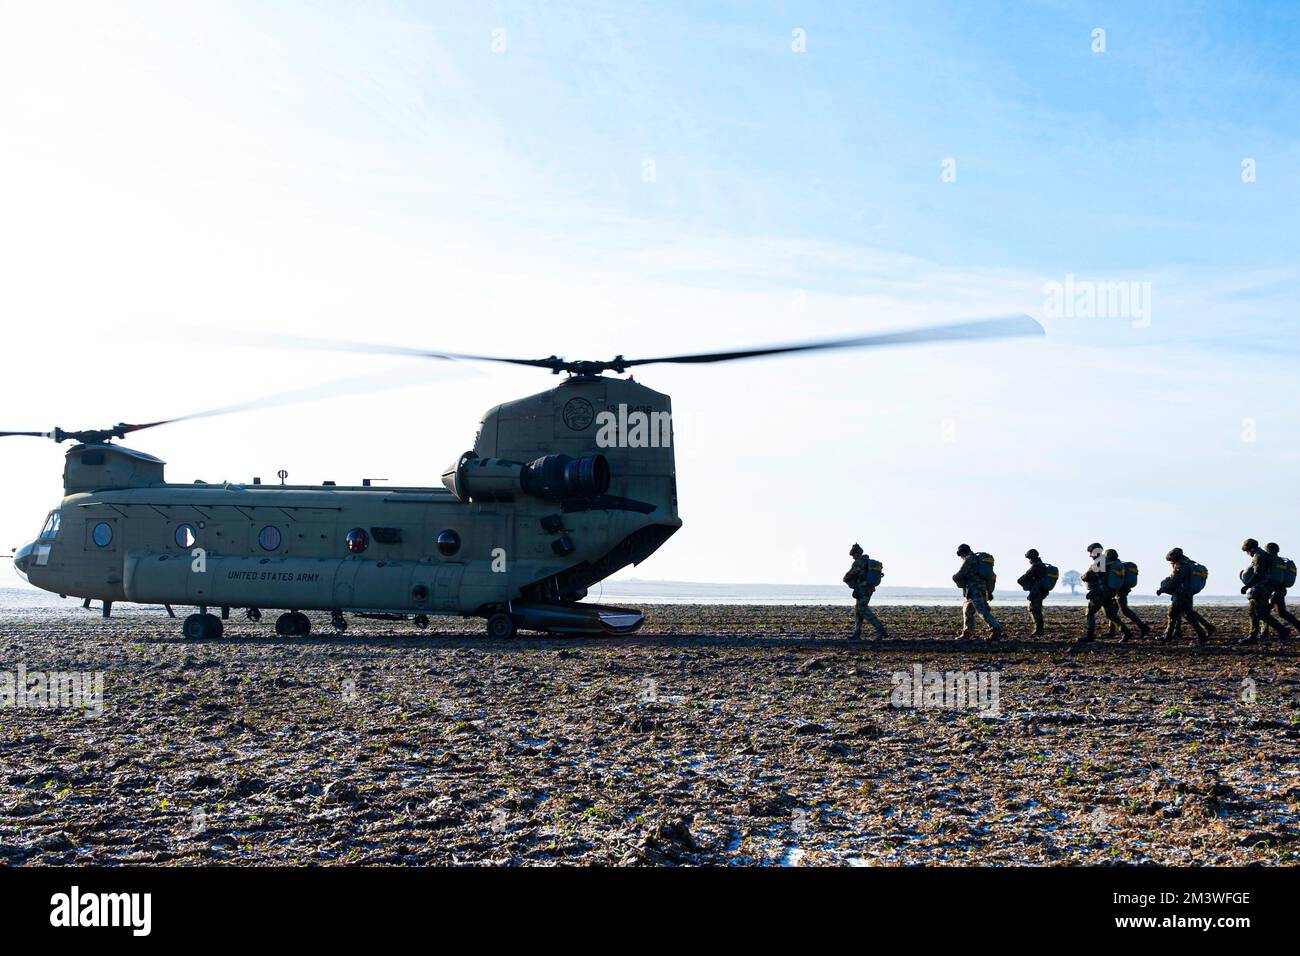 December 13, 2022 - Rheinland-Pfalz, Germany - Jumpers board a 214th Aviation Regiment Boeing CH-47 Chinook helicopter prior to a parachute jump at Alzey drop zone in Ober-FlÃ¶rsheim, Germany, December. 13, 2022. U.S. Army Soldiers from 214th AVN, U.S. Air Force Airmen from the 435th Contingency Squadron based at Ramstein Air Base, Germany, and partner and allied nations trained to become more proficient parachutists and strengthen their partnership in the pursuit of providing air and ground support wherever it may be needed. Allied forces in Europe regularly train together to ensure timely Stock Photo